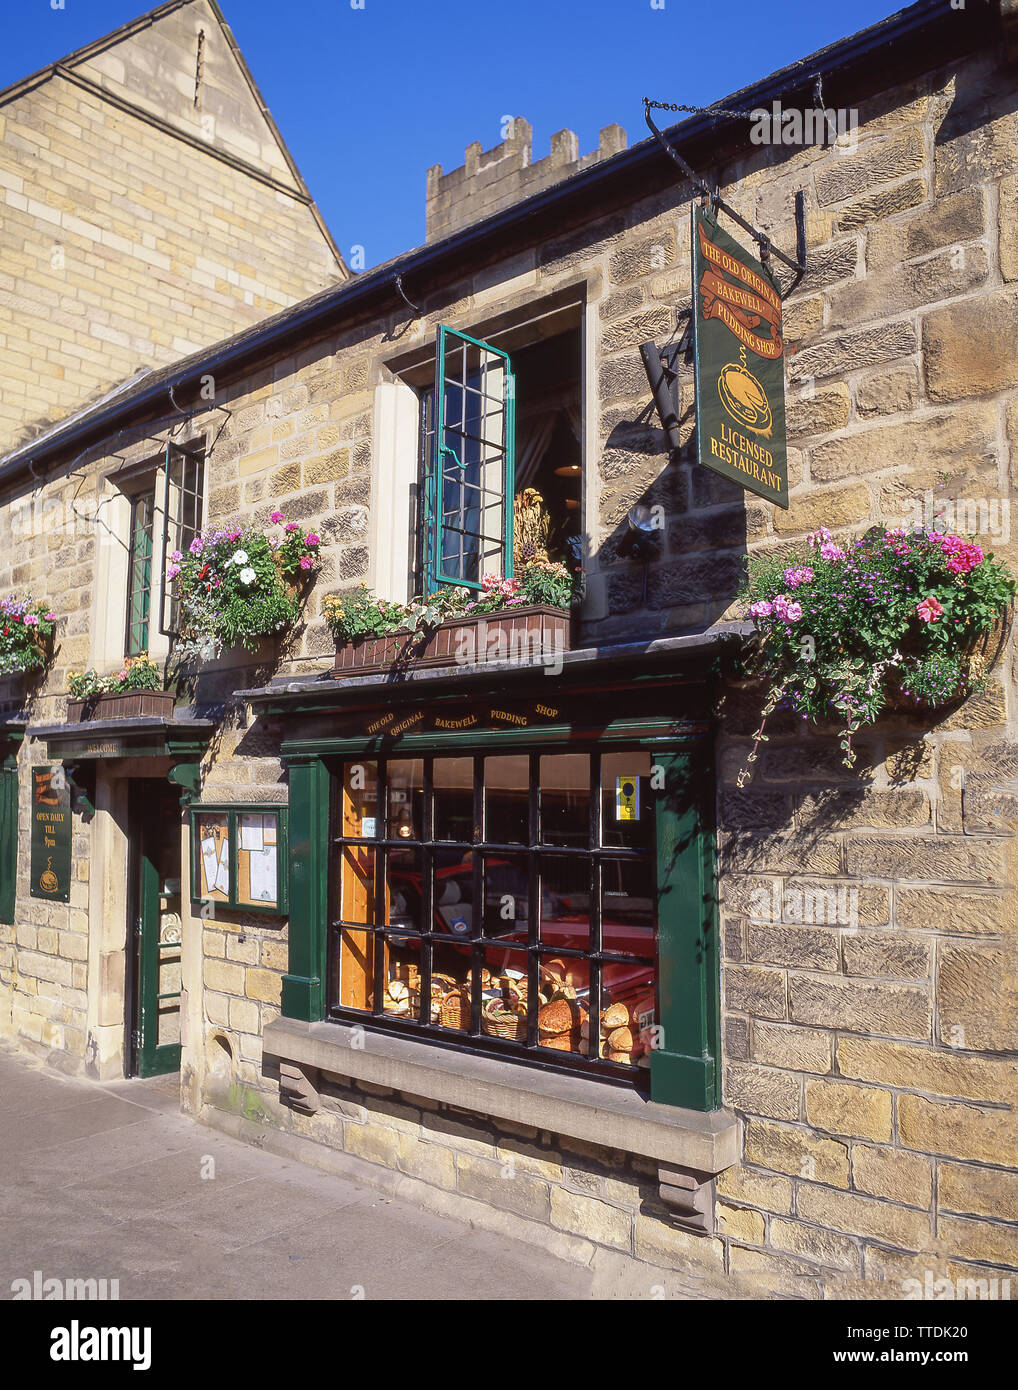 The Old Original Bakewell Pudding Shop, The Square, Bakewell, Derbyshire,  England, United Kingdom Stock Photo - Alamy